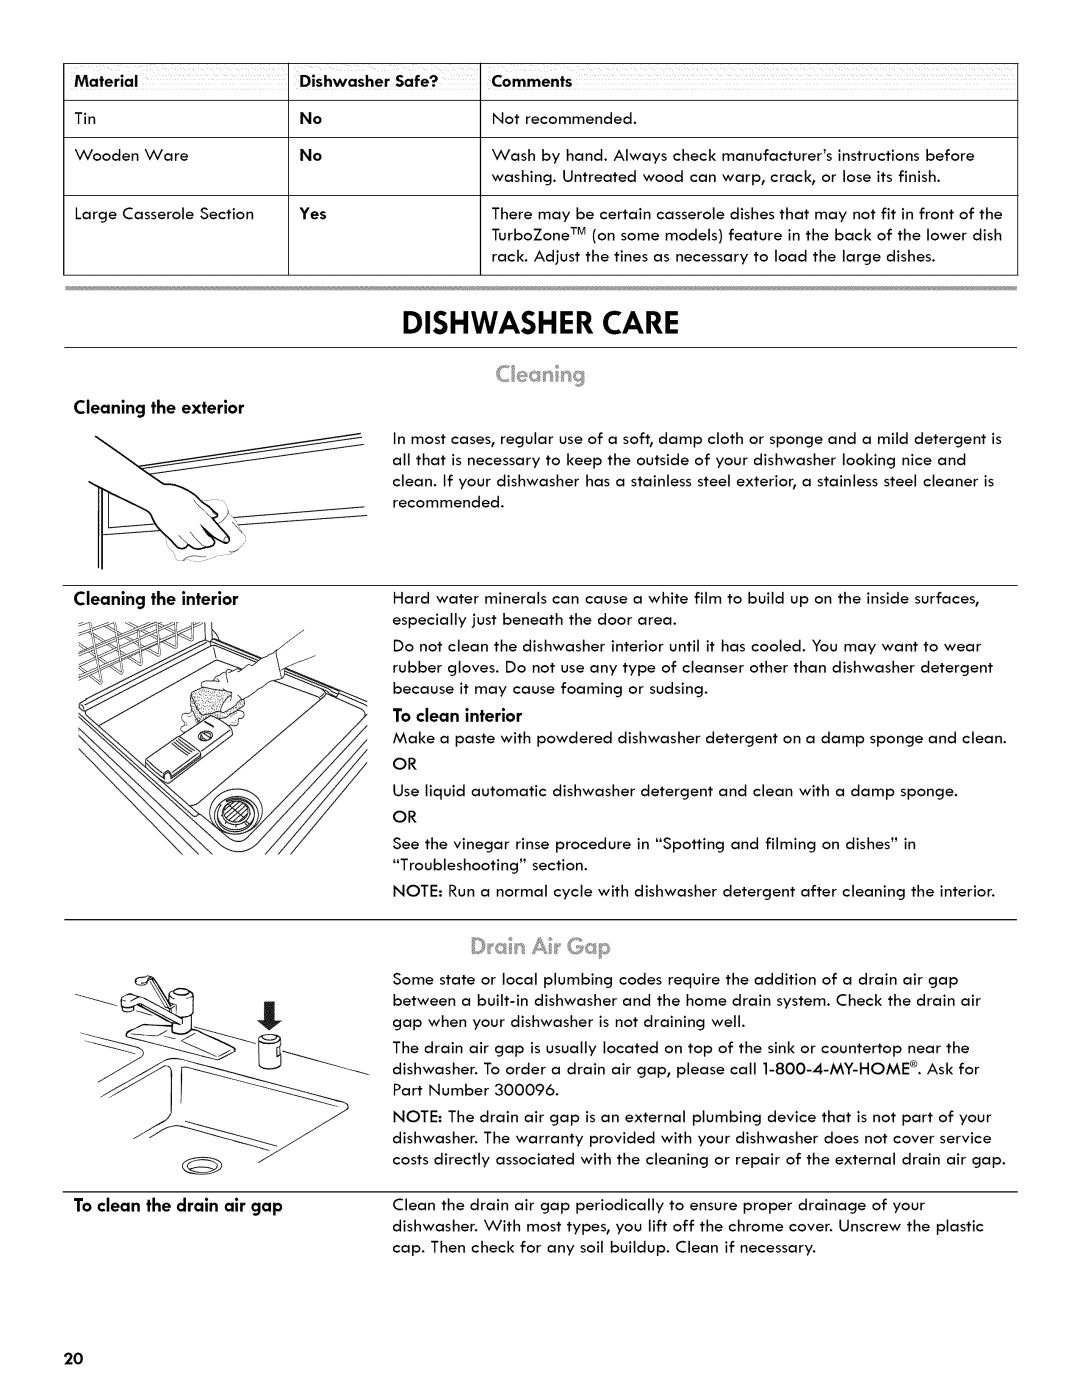 Kenmore 665.1404 manual Dishwasher Care, Material, DishwasherSafe?, Comments, Cleaning the interior, To clean interior 